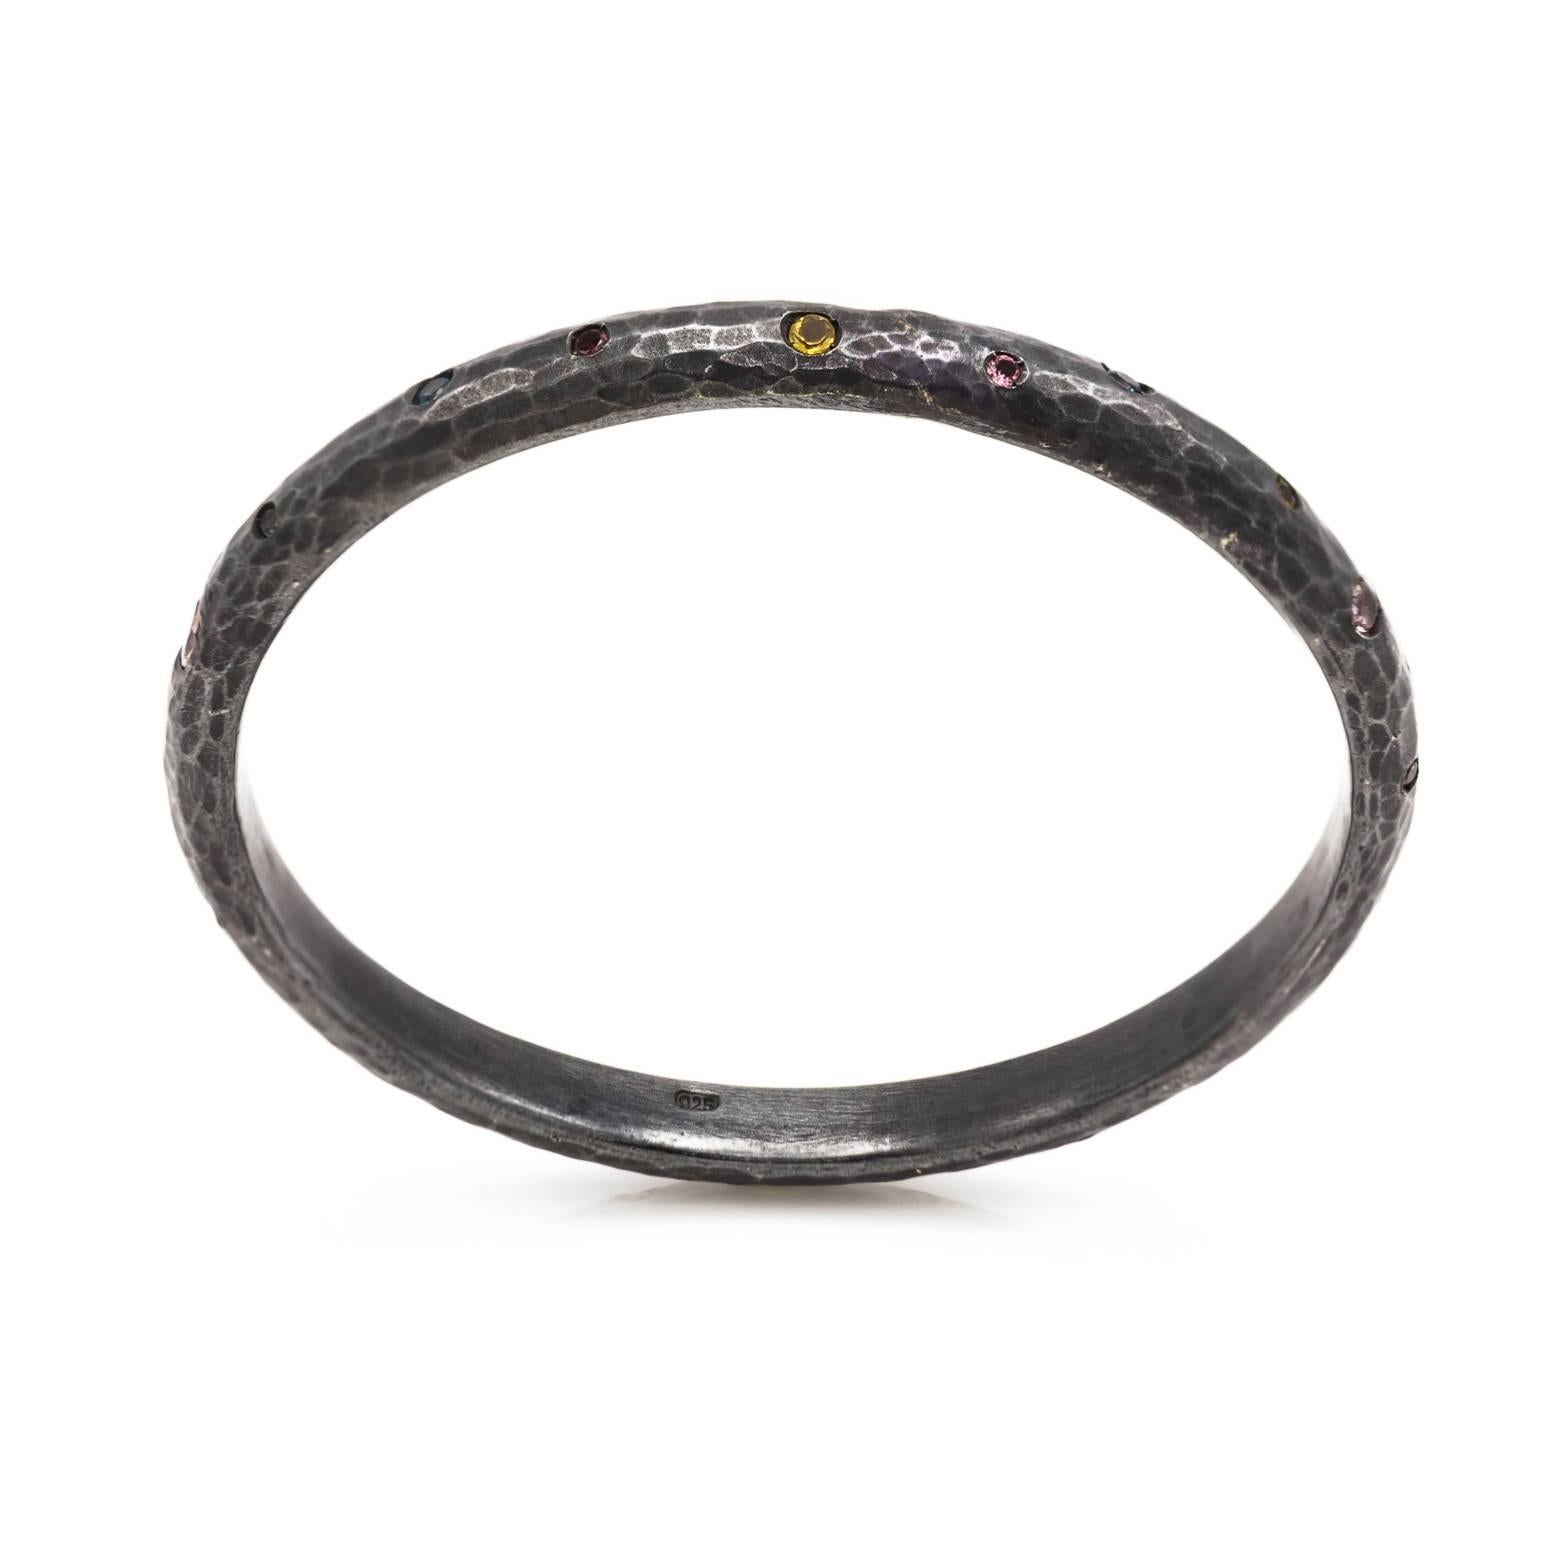 This strong and sturdy bangle is hammered and has hidden jewels like sparkling candies decorated throughout. The beautiful bright colors of the tourmaline, citrine and topaz bring light and life to the contrasting dark hammered boldness of the